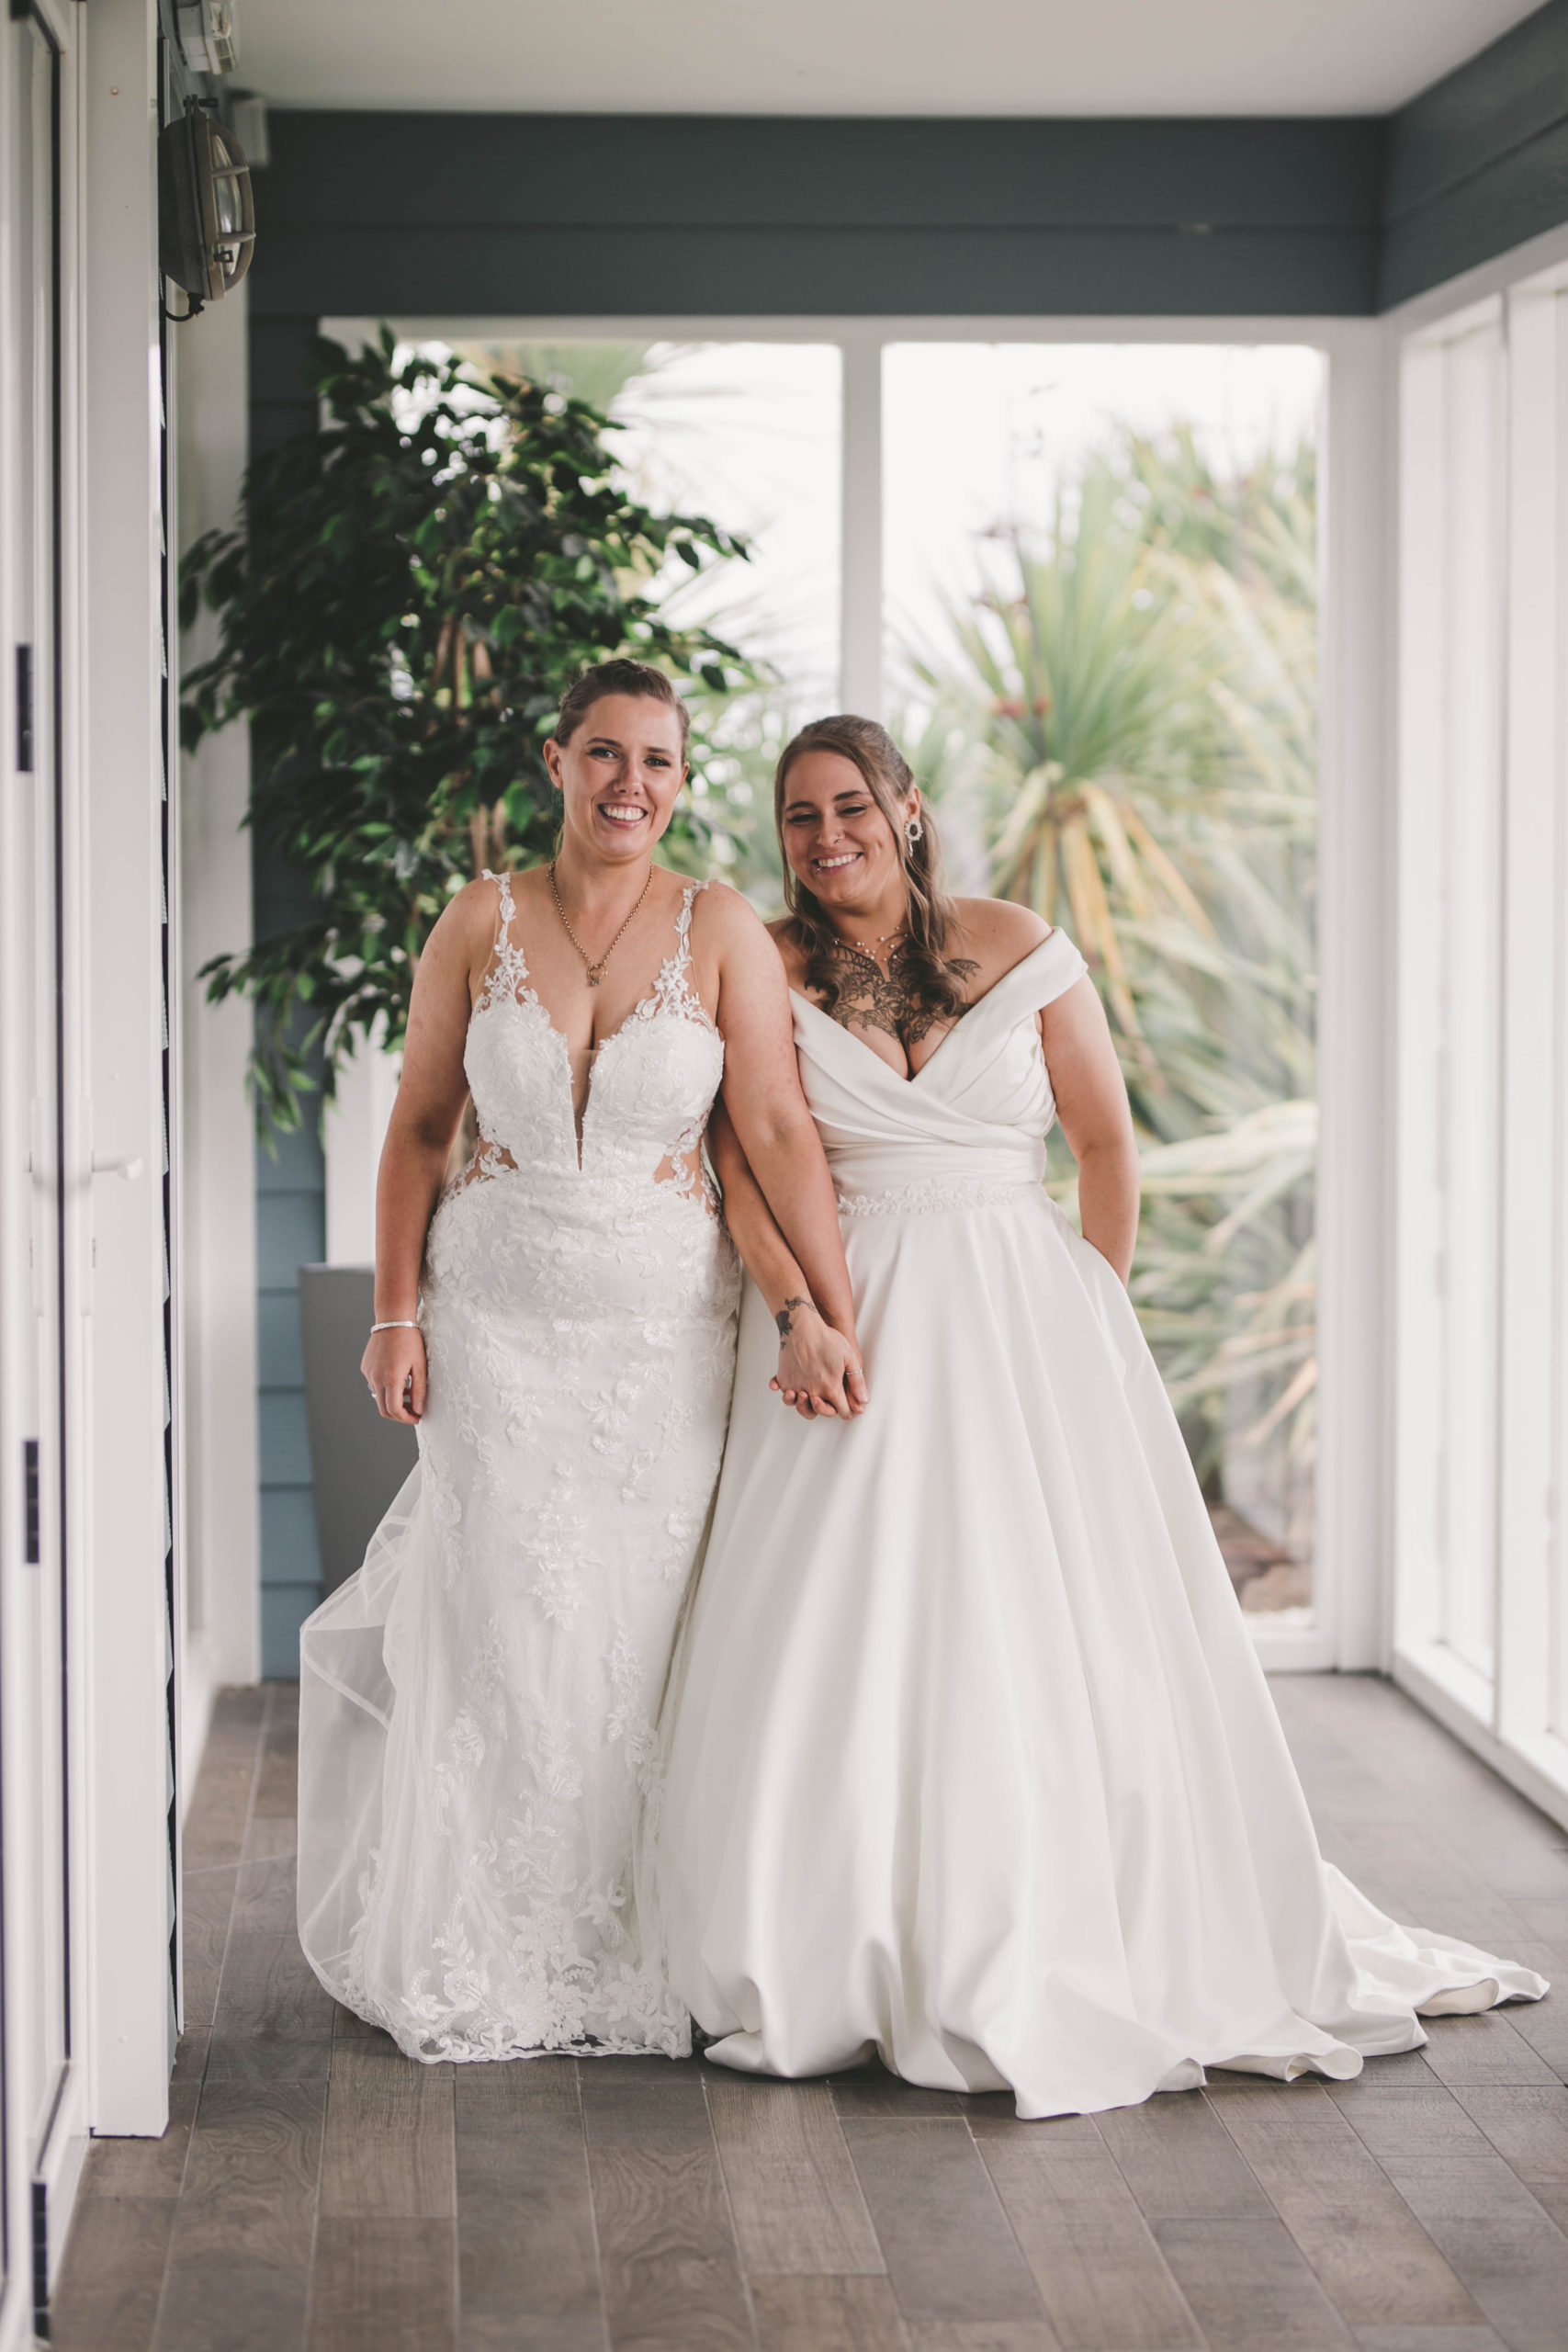 Ashleigh and Nicole – The Waterside